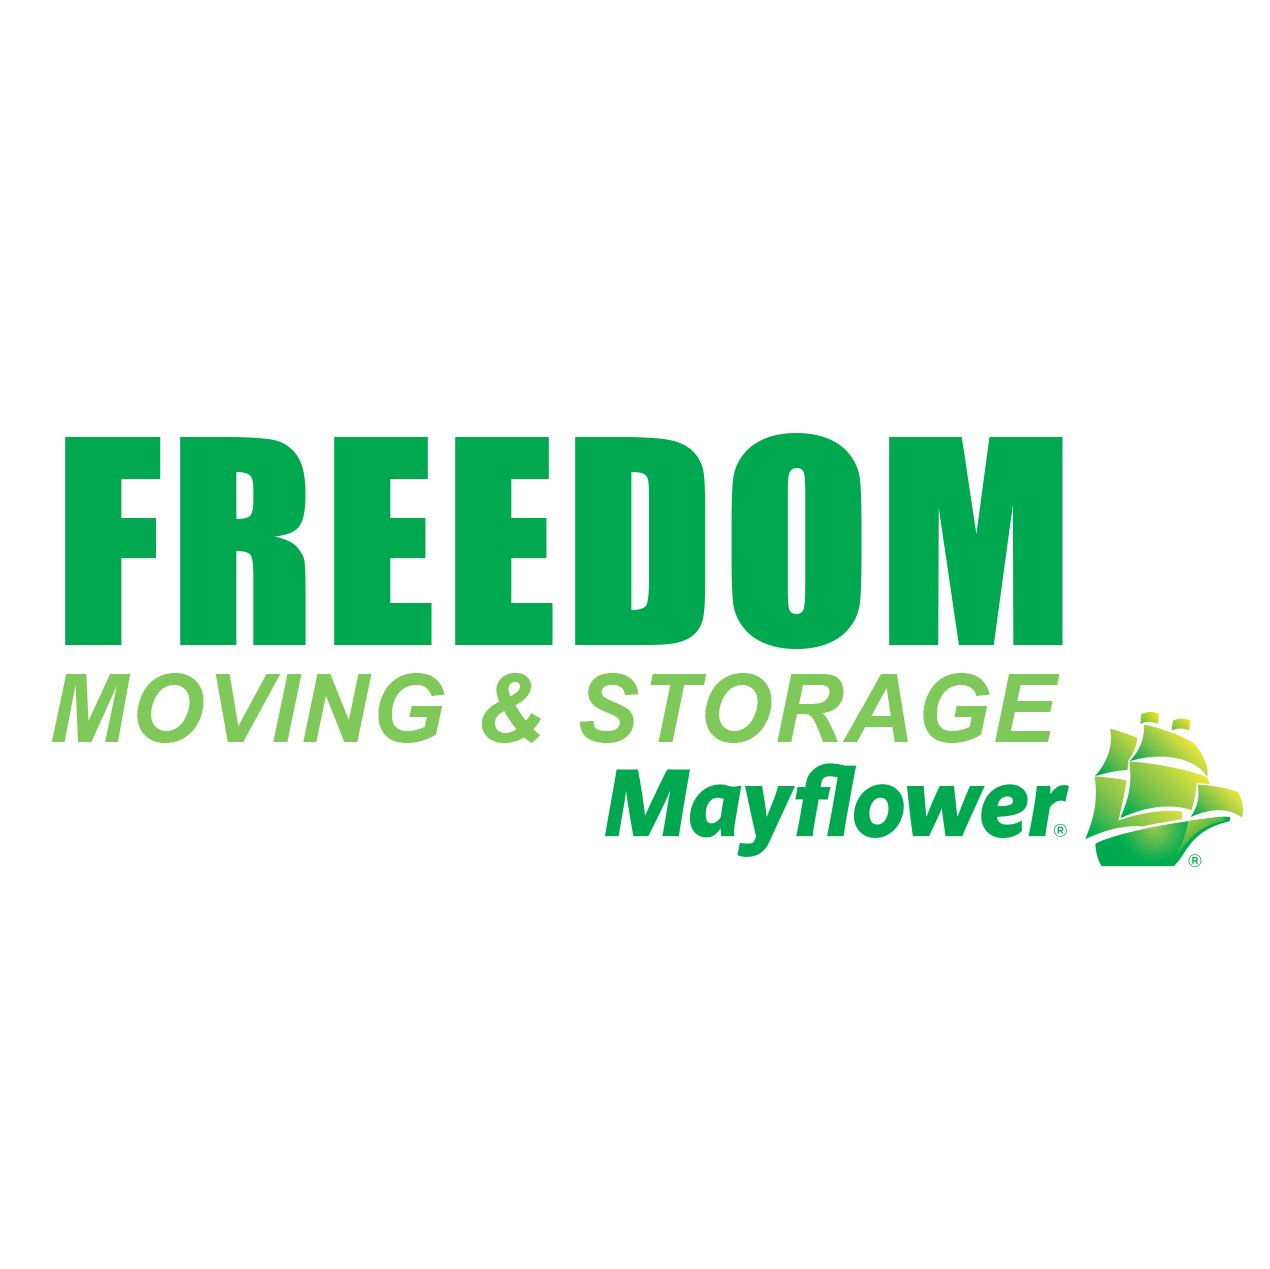 Third generation movers covering NJ, NY, CT and beyond with residential and commercial relocation services.